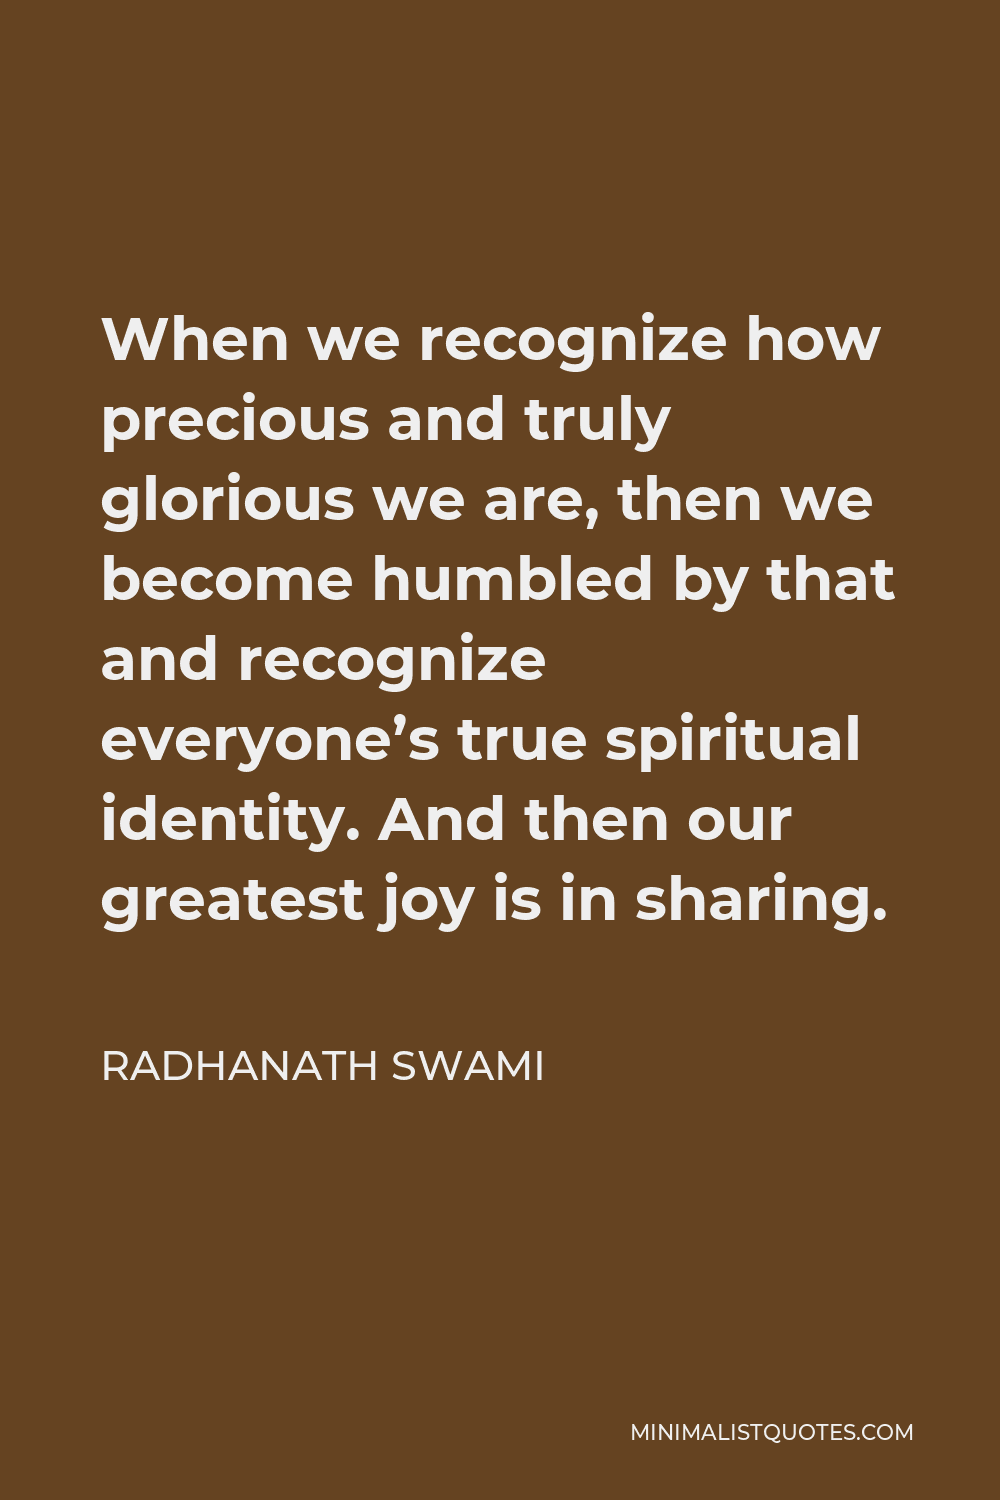 Radhanath Swami Quote - When we recognize how precious and truly glorious we are, then we become humbled by that and recognize everyone’s true spiritual identity. And then our greatest joy is in sharing.